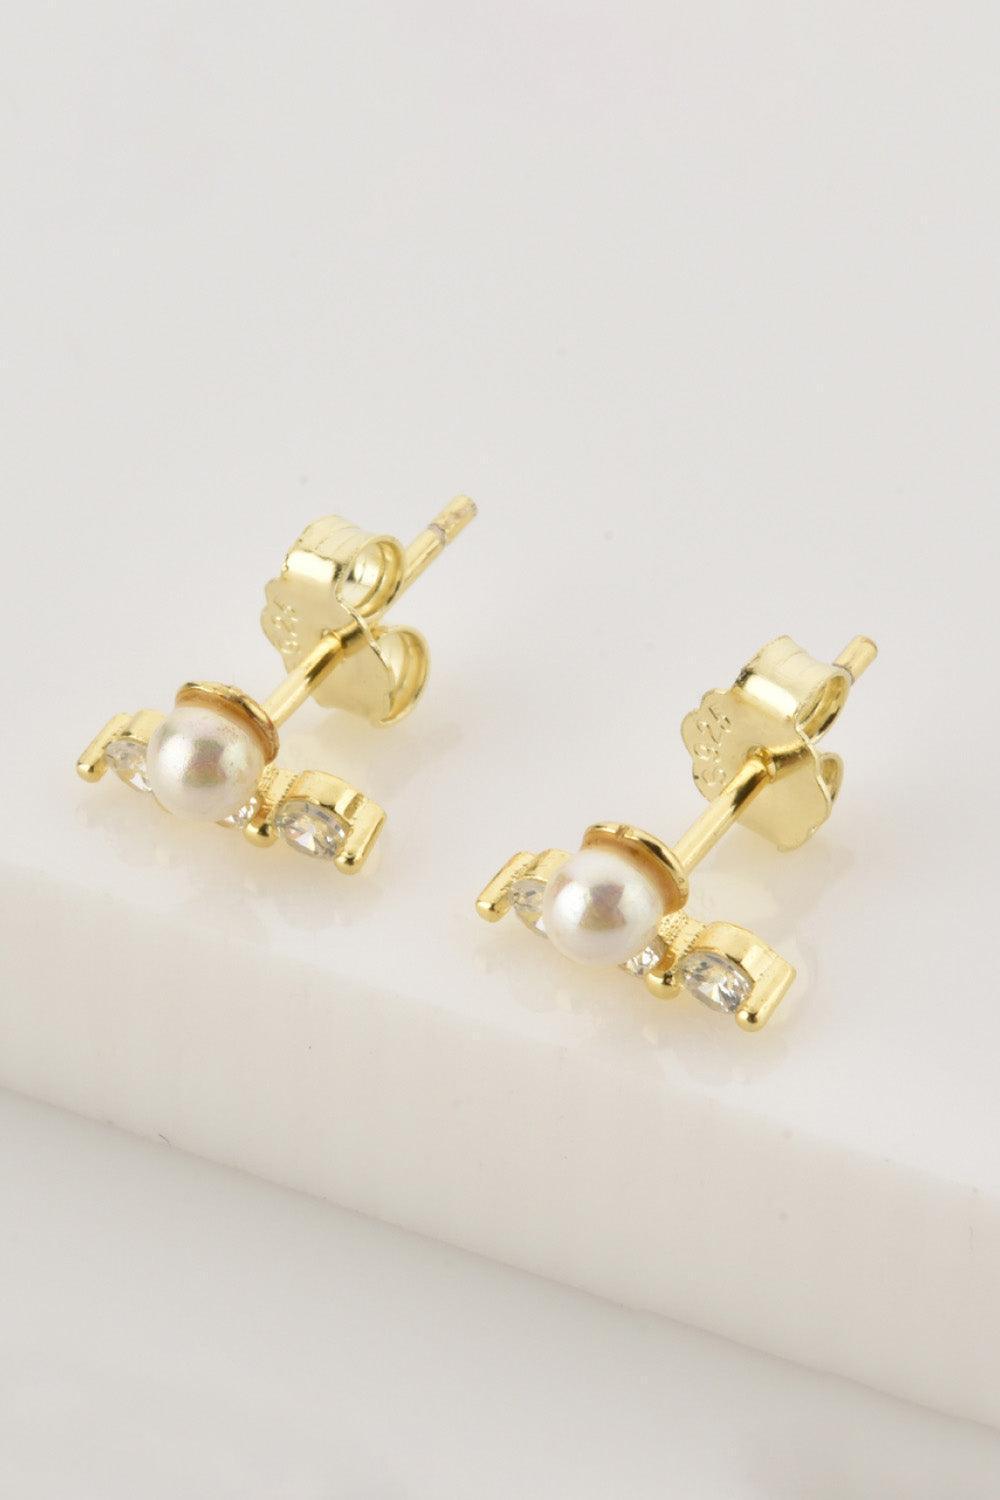 Superb Zircon And Pearl Detail Sterling Silver Stud Earrings - MXSTUDIO.COM